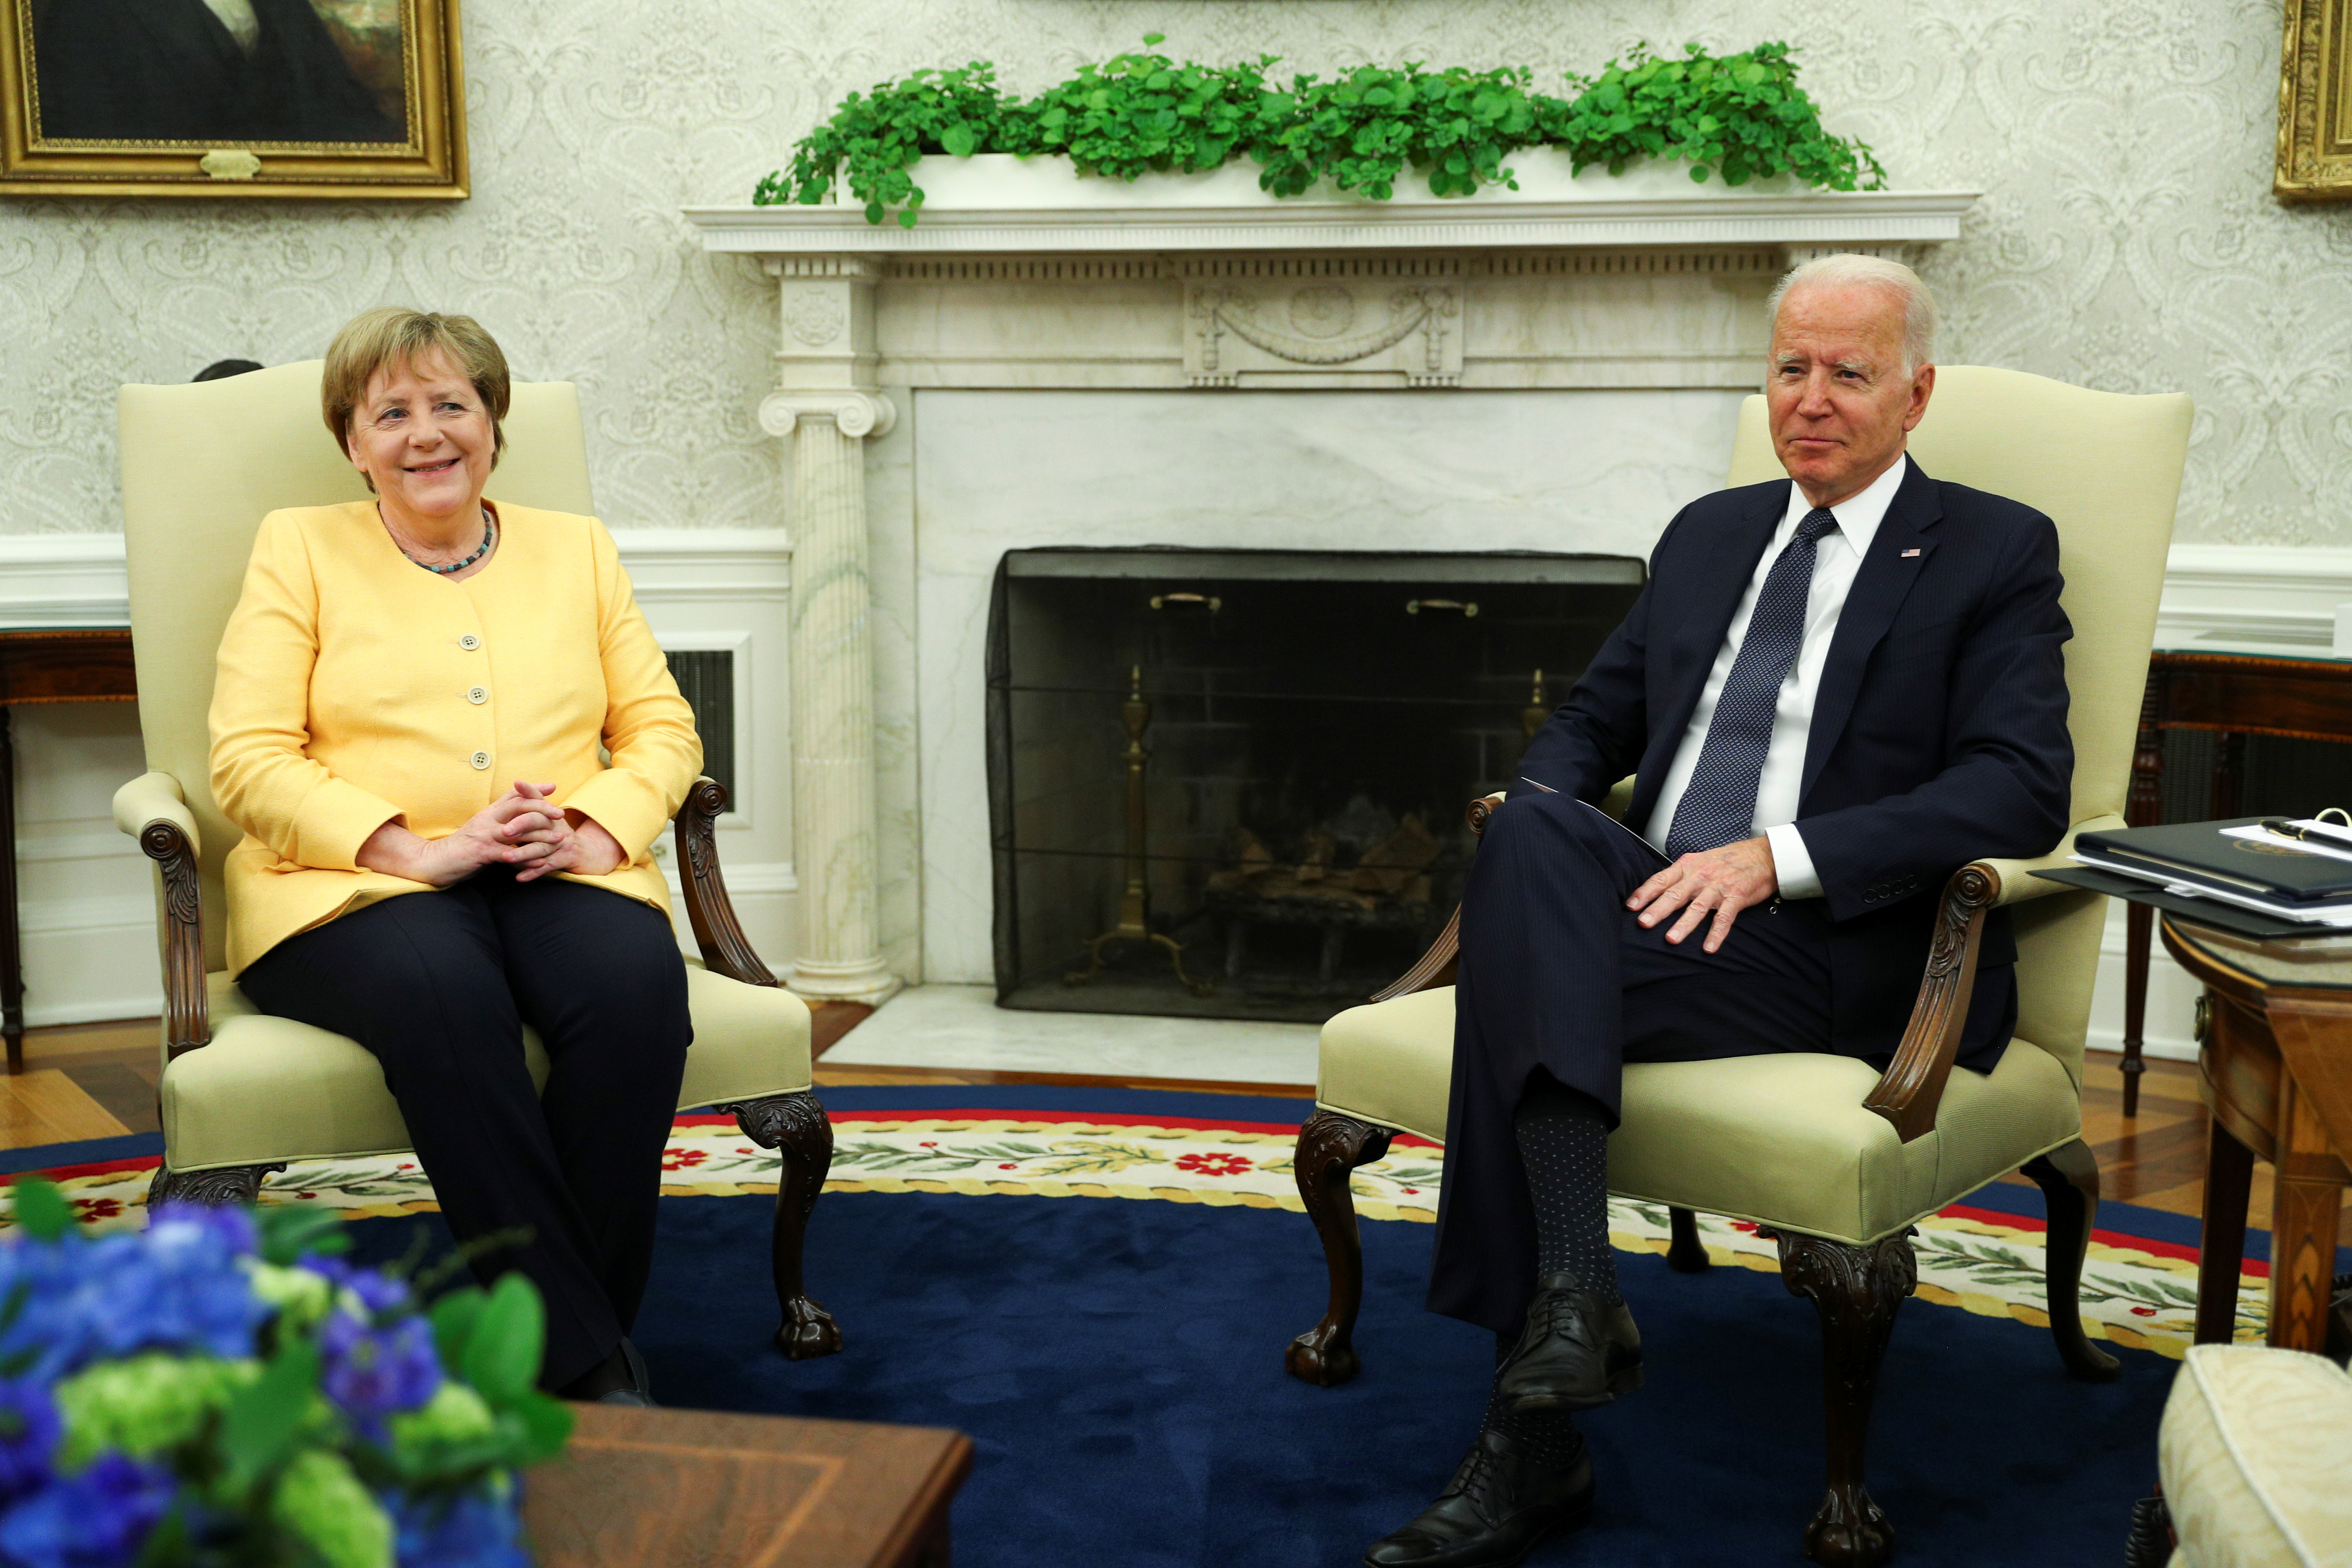 U.S. President Joe Biden holds a bilateral meeting with German Chancellor Angela Merkel in the Oval Office at the White House